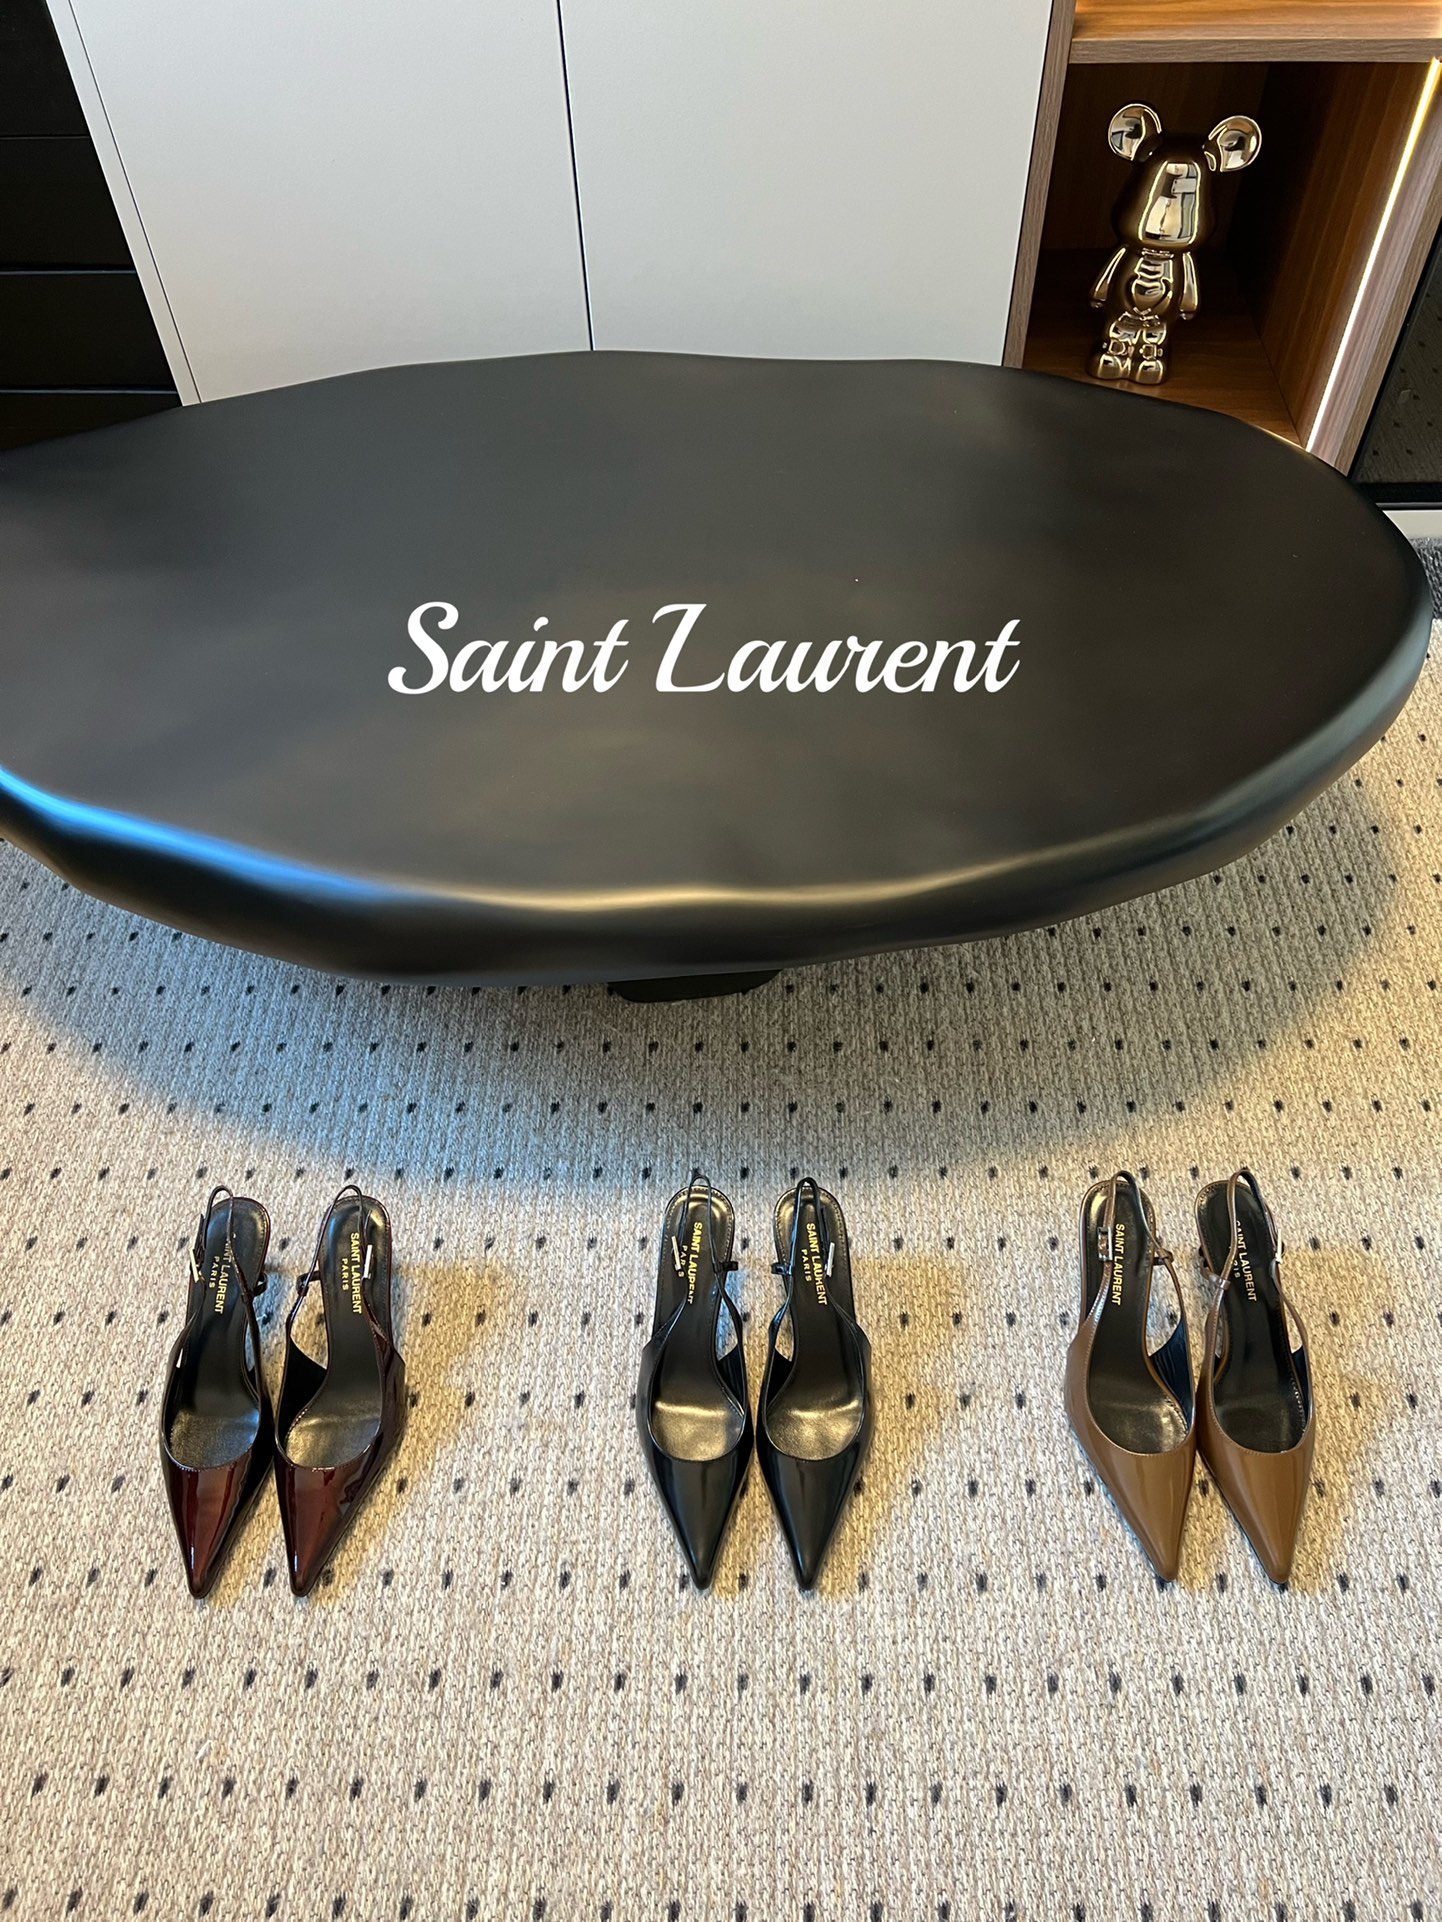 Yves Saint Laurent Shoes High Heel Pumps Spring Collection